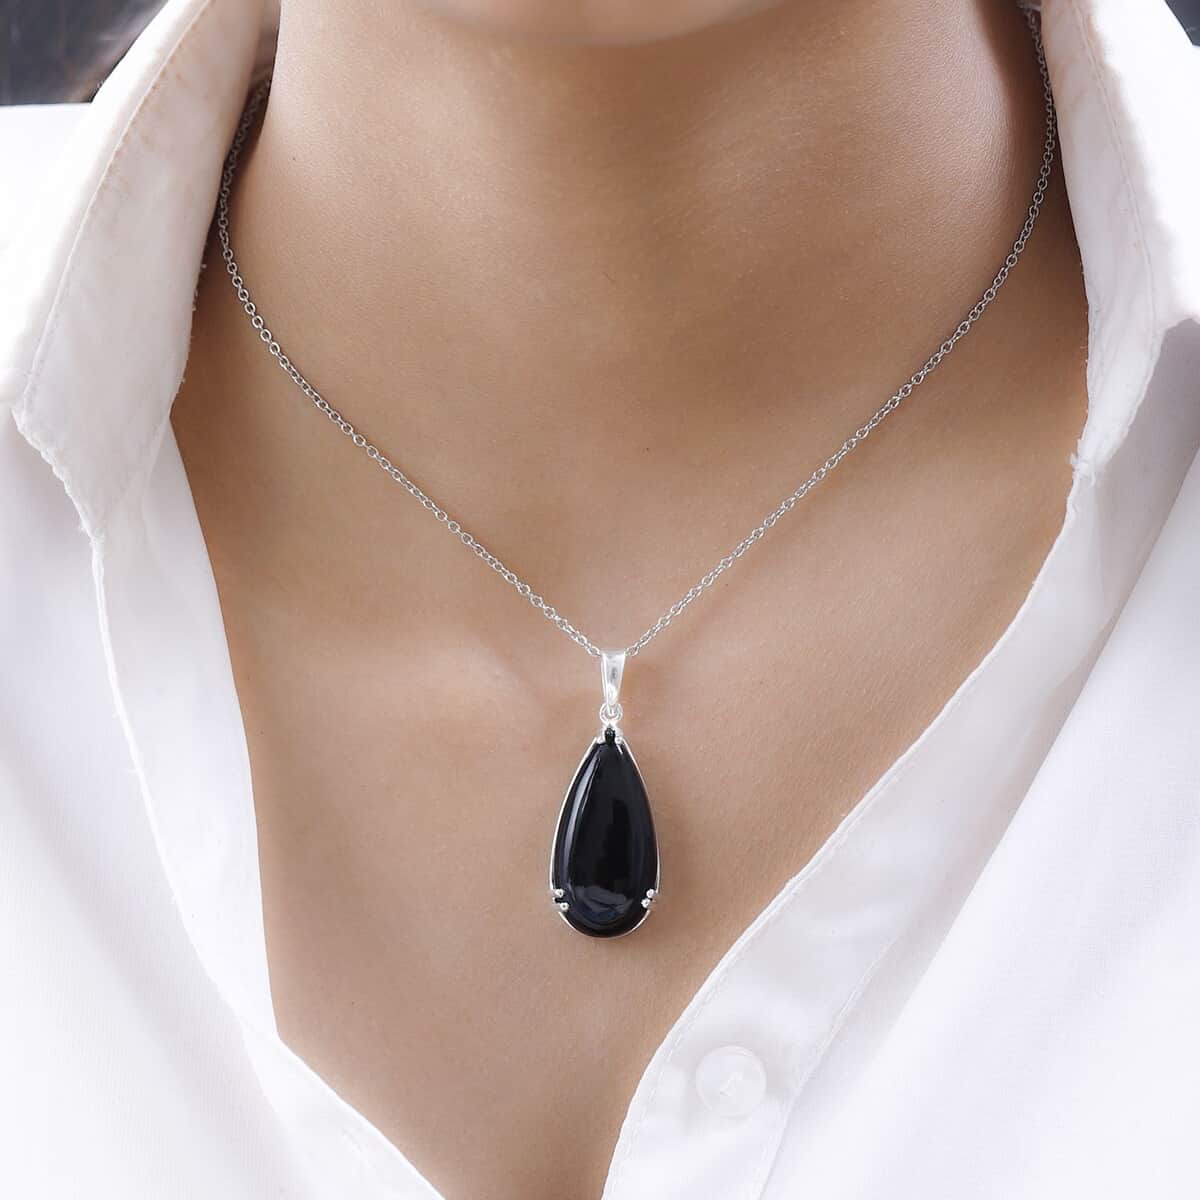 Black Onyx Pendant Necklace 20 Inches in Sterling Silver, Black Teardrop Pendant Necklaces for Women, Silver Boho Pendant - December Birthstone Necklace with Stainless Steel Chain 20 Inches 20.00 ctw image number 1